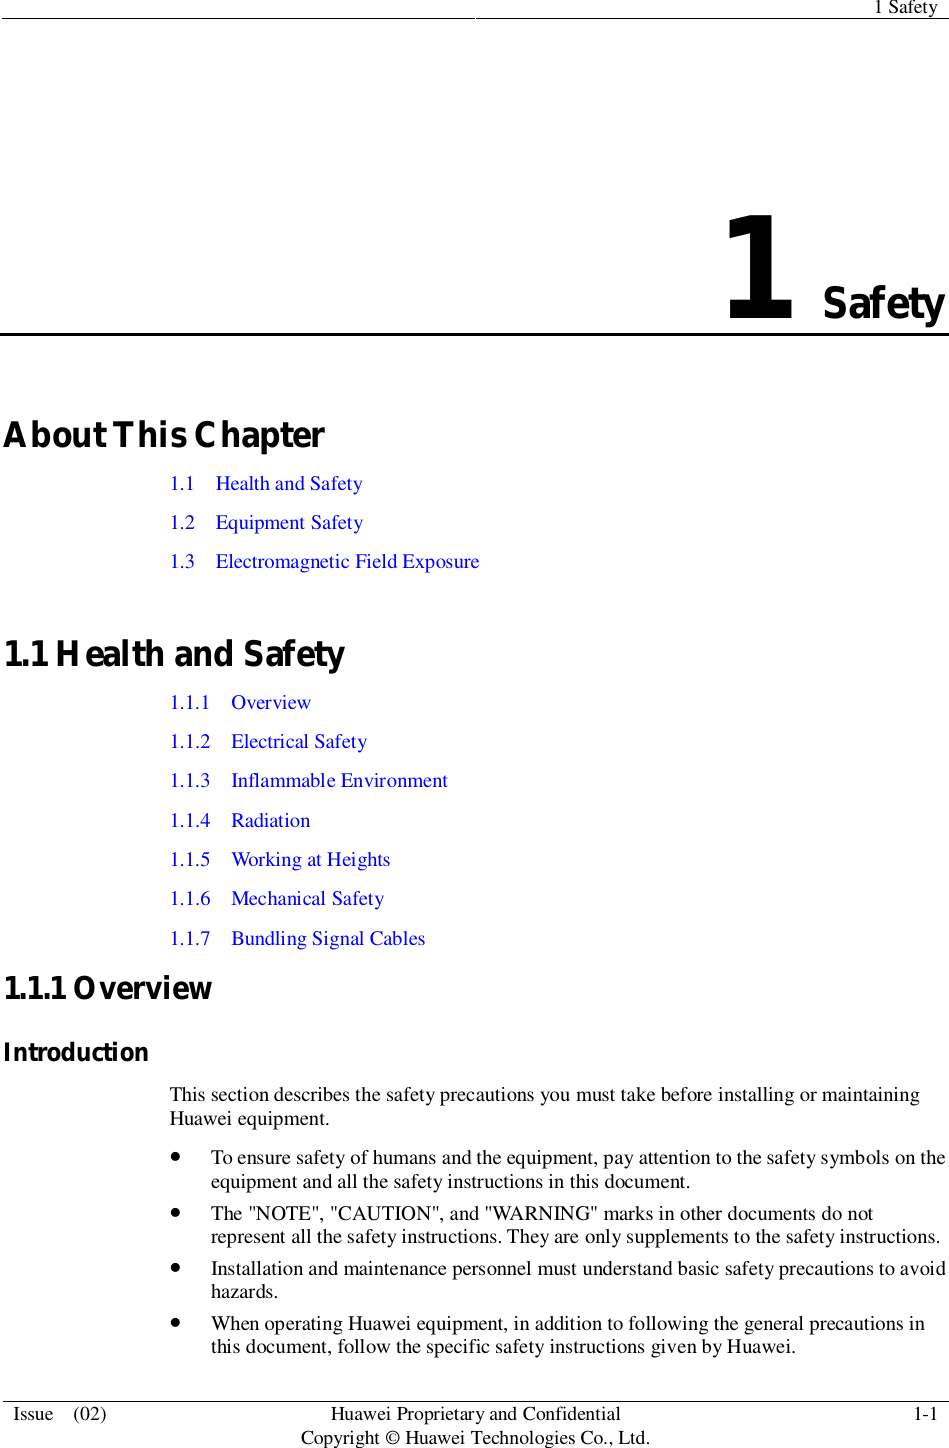 1 SafetyIssue  (02) HuaweiProprietary and ConfidentialCopyright © Huawei Technologies Co., Ltd. 1-11SafetyAbout This Chapter1.1   Health and Safety1.2  Equipment Safety1.3   Electromagnetic Field Exposure1.1 Health and Safety1.1.1  Overview1.1.2   Electrical Safety1.1.3   Inflammable Environment1.1.4  Radiation1.1.5   Working at Heights1.1.6  Mechanical Safety1.1.7   Bundling Signal Cables1.1.1 OverviewIntroductionThis section describes the safety precautions you must take before installing or maintainingHuawei equipment.To ensure safety of humans and the equipment, pay attention to the safety symbols on theequipment and all the safety instructions in this document.The &quot;NOTE&quot;, &quot;CAUTION&quot;, and &quot;WARNING&quot; marks in other documents do notrepresent all the safety instructions. They are only supplements to the safety instructions.Installation and maintenance personnel must understand basic safety precautions to avoidhazards.When operating Huawei equipment, in addition to following the general precautions inthis document, follow the specific safety instructions given by Huawei.